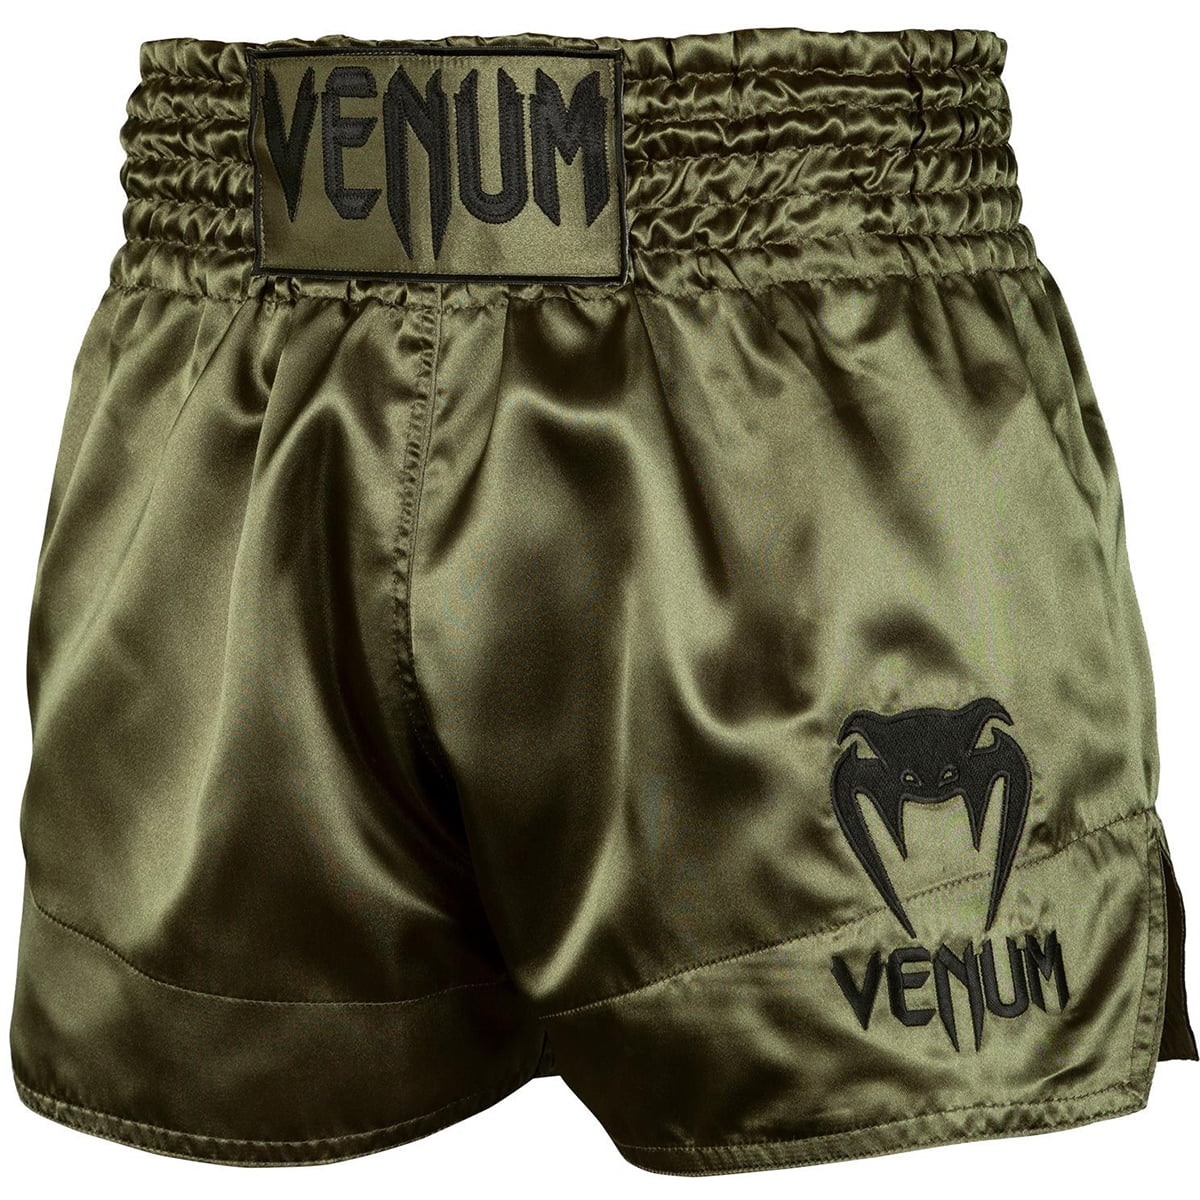 Usi Universal Men's Polyester Muay Thai Shorts (Black and Green, Large) :  Amazon.in: Clothing & Accessories